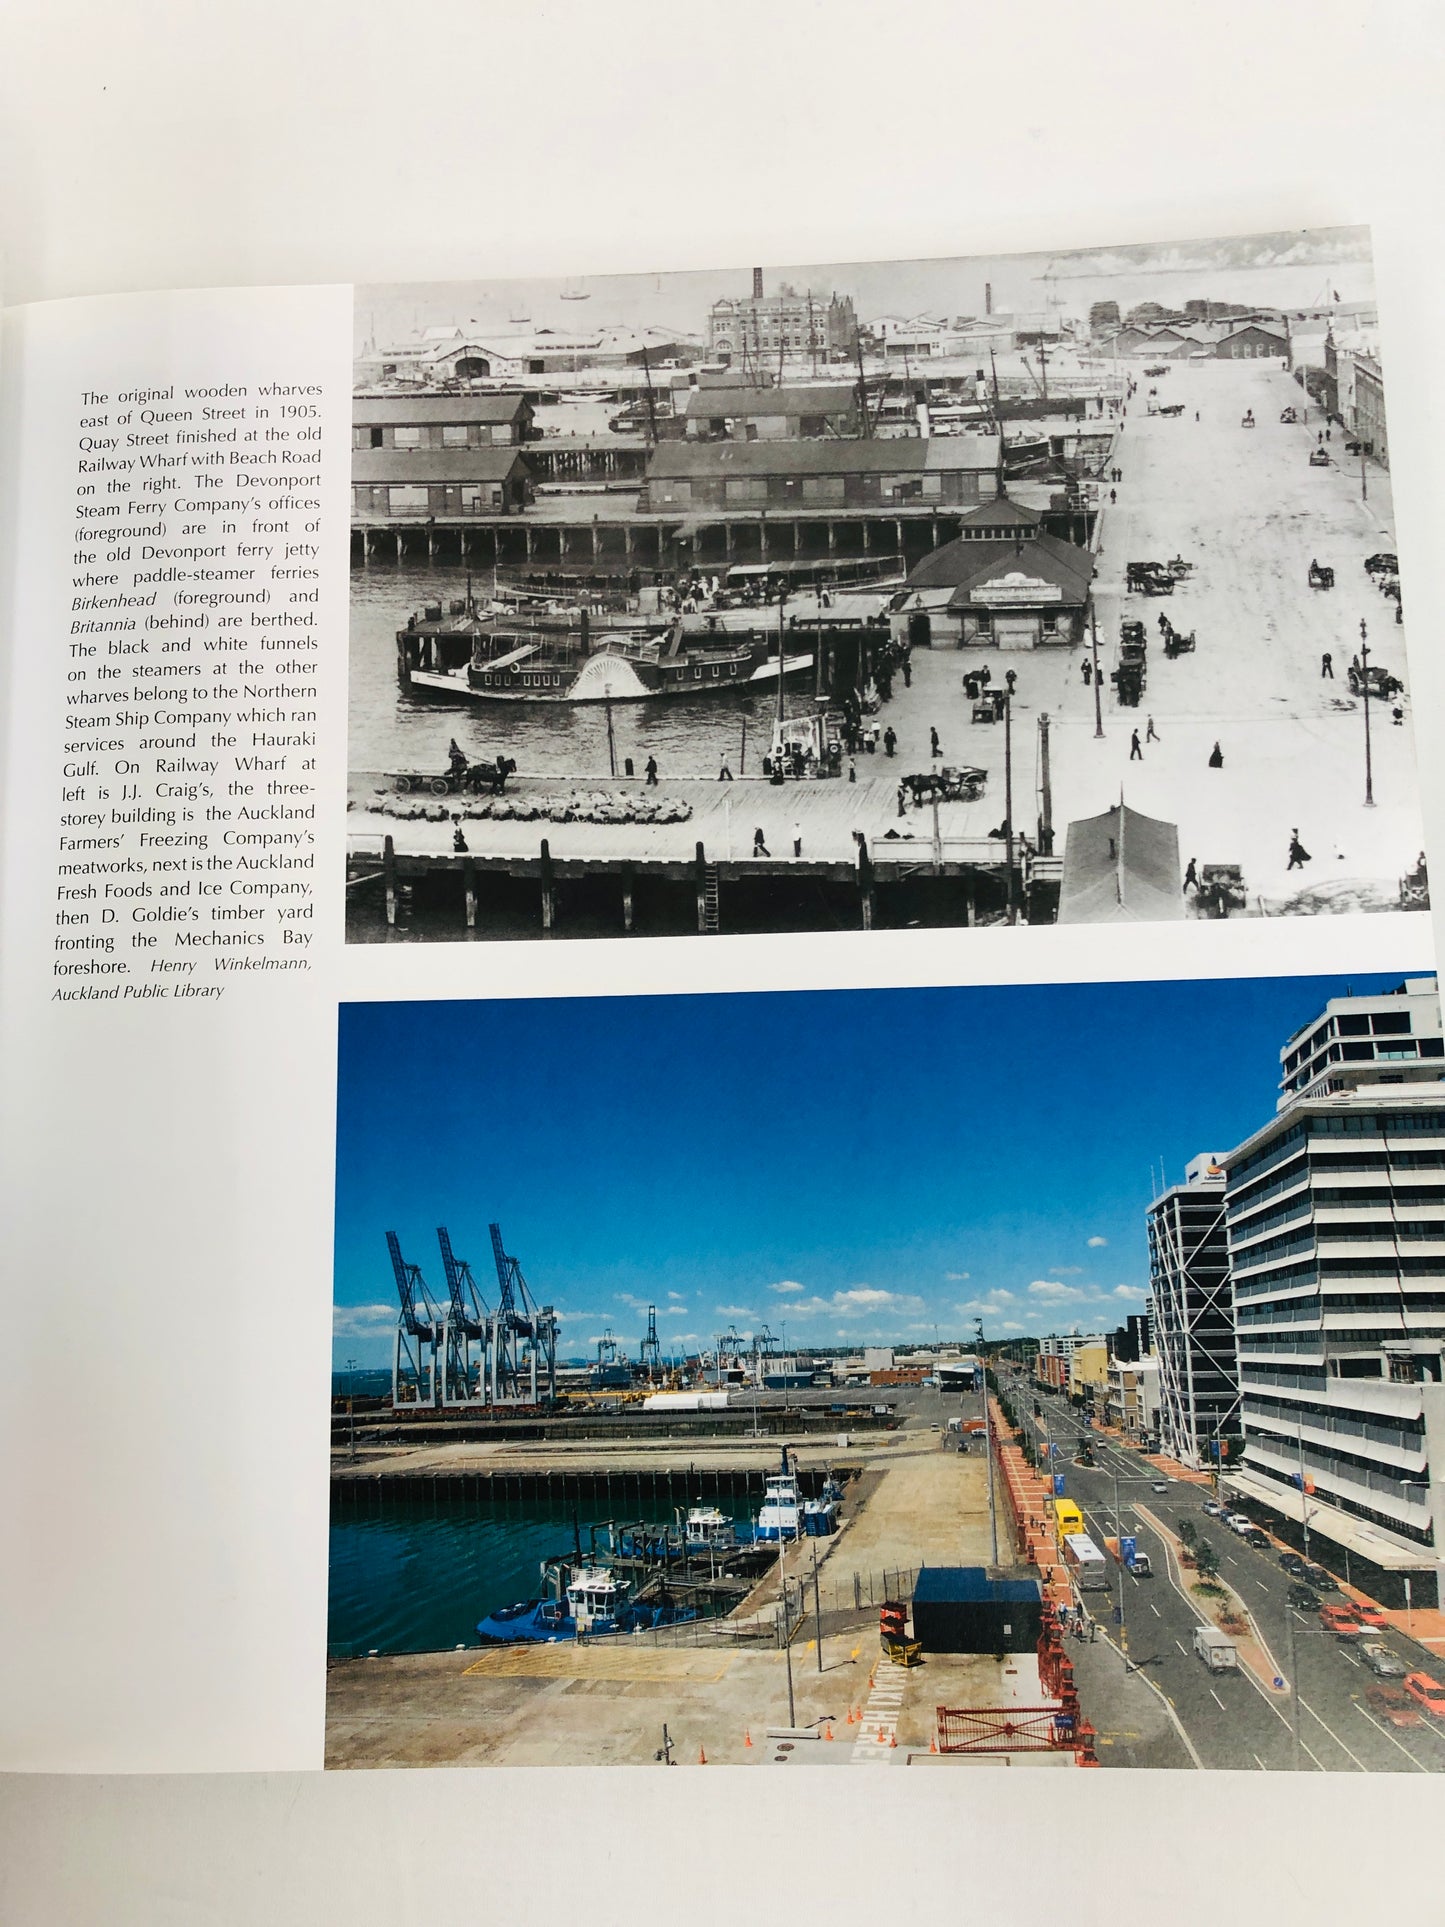 
                  
                    Auckland - A Portrait of Today and Yesterday by Graham Stewart (15282)
                  
                